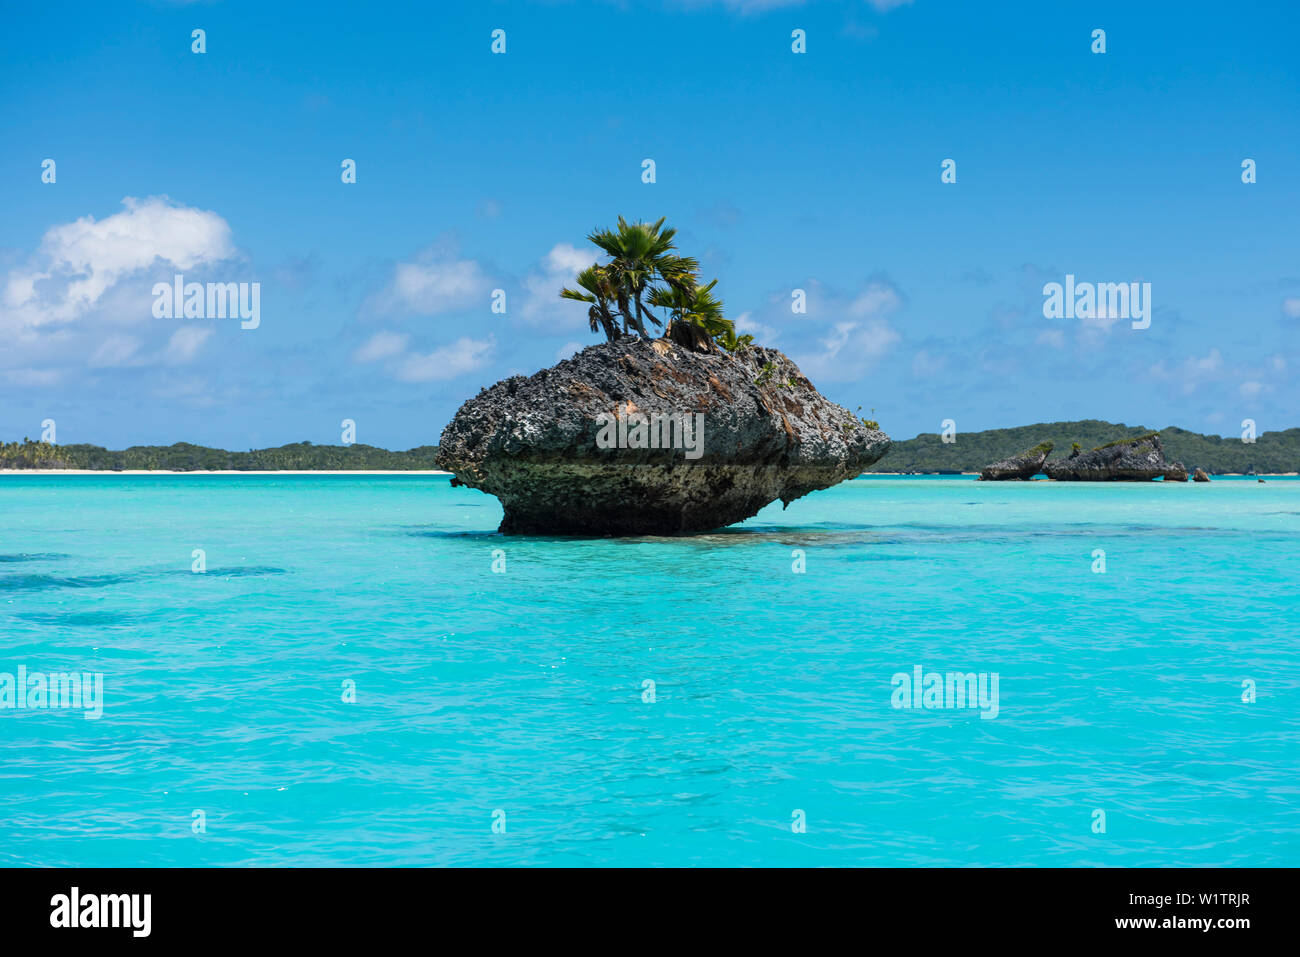 A tiny mushroom-shaped island crowned by several palm trees stands among turquoise waters near a large island in the background, Fulaga Island, Lau Gr Stock Photo